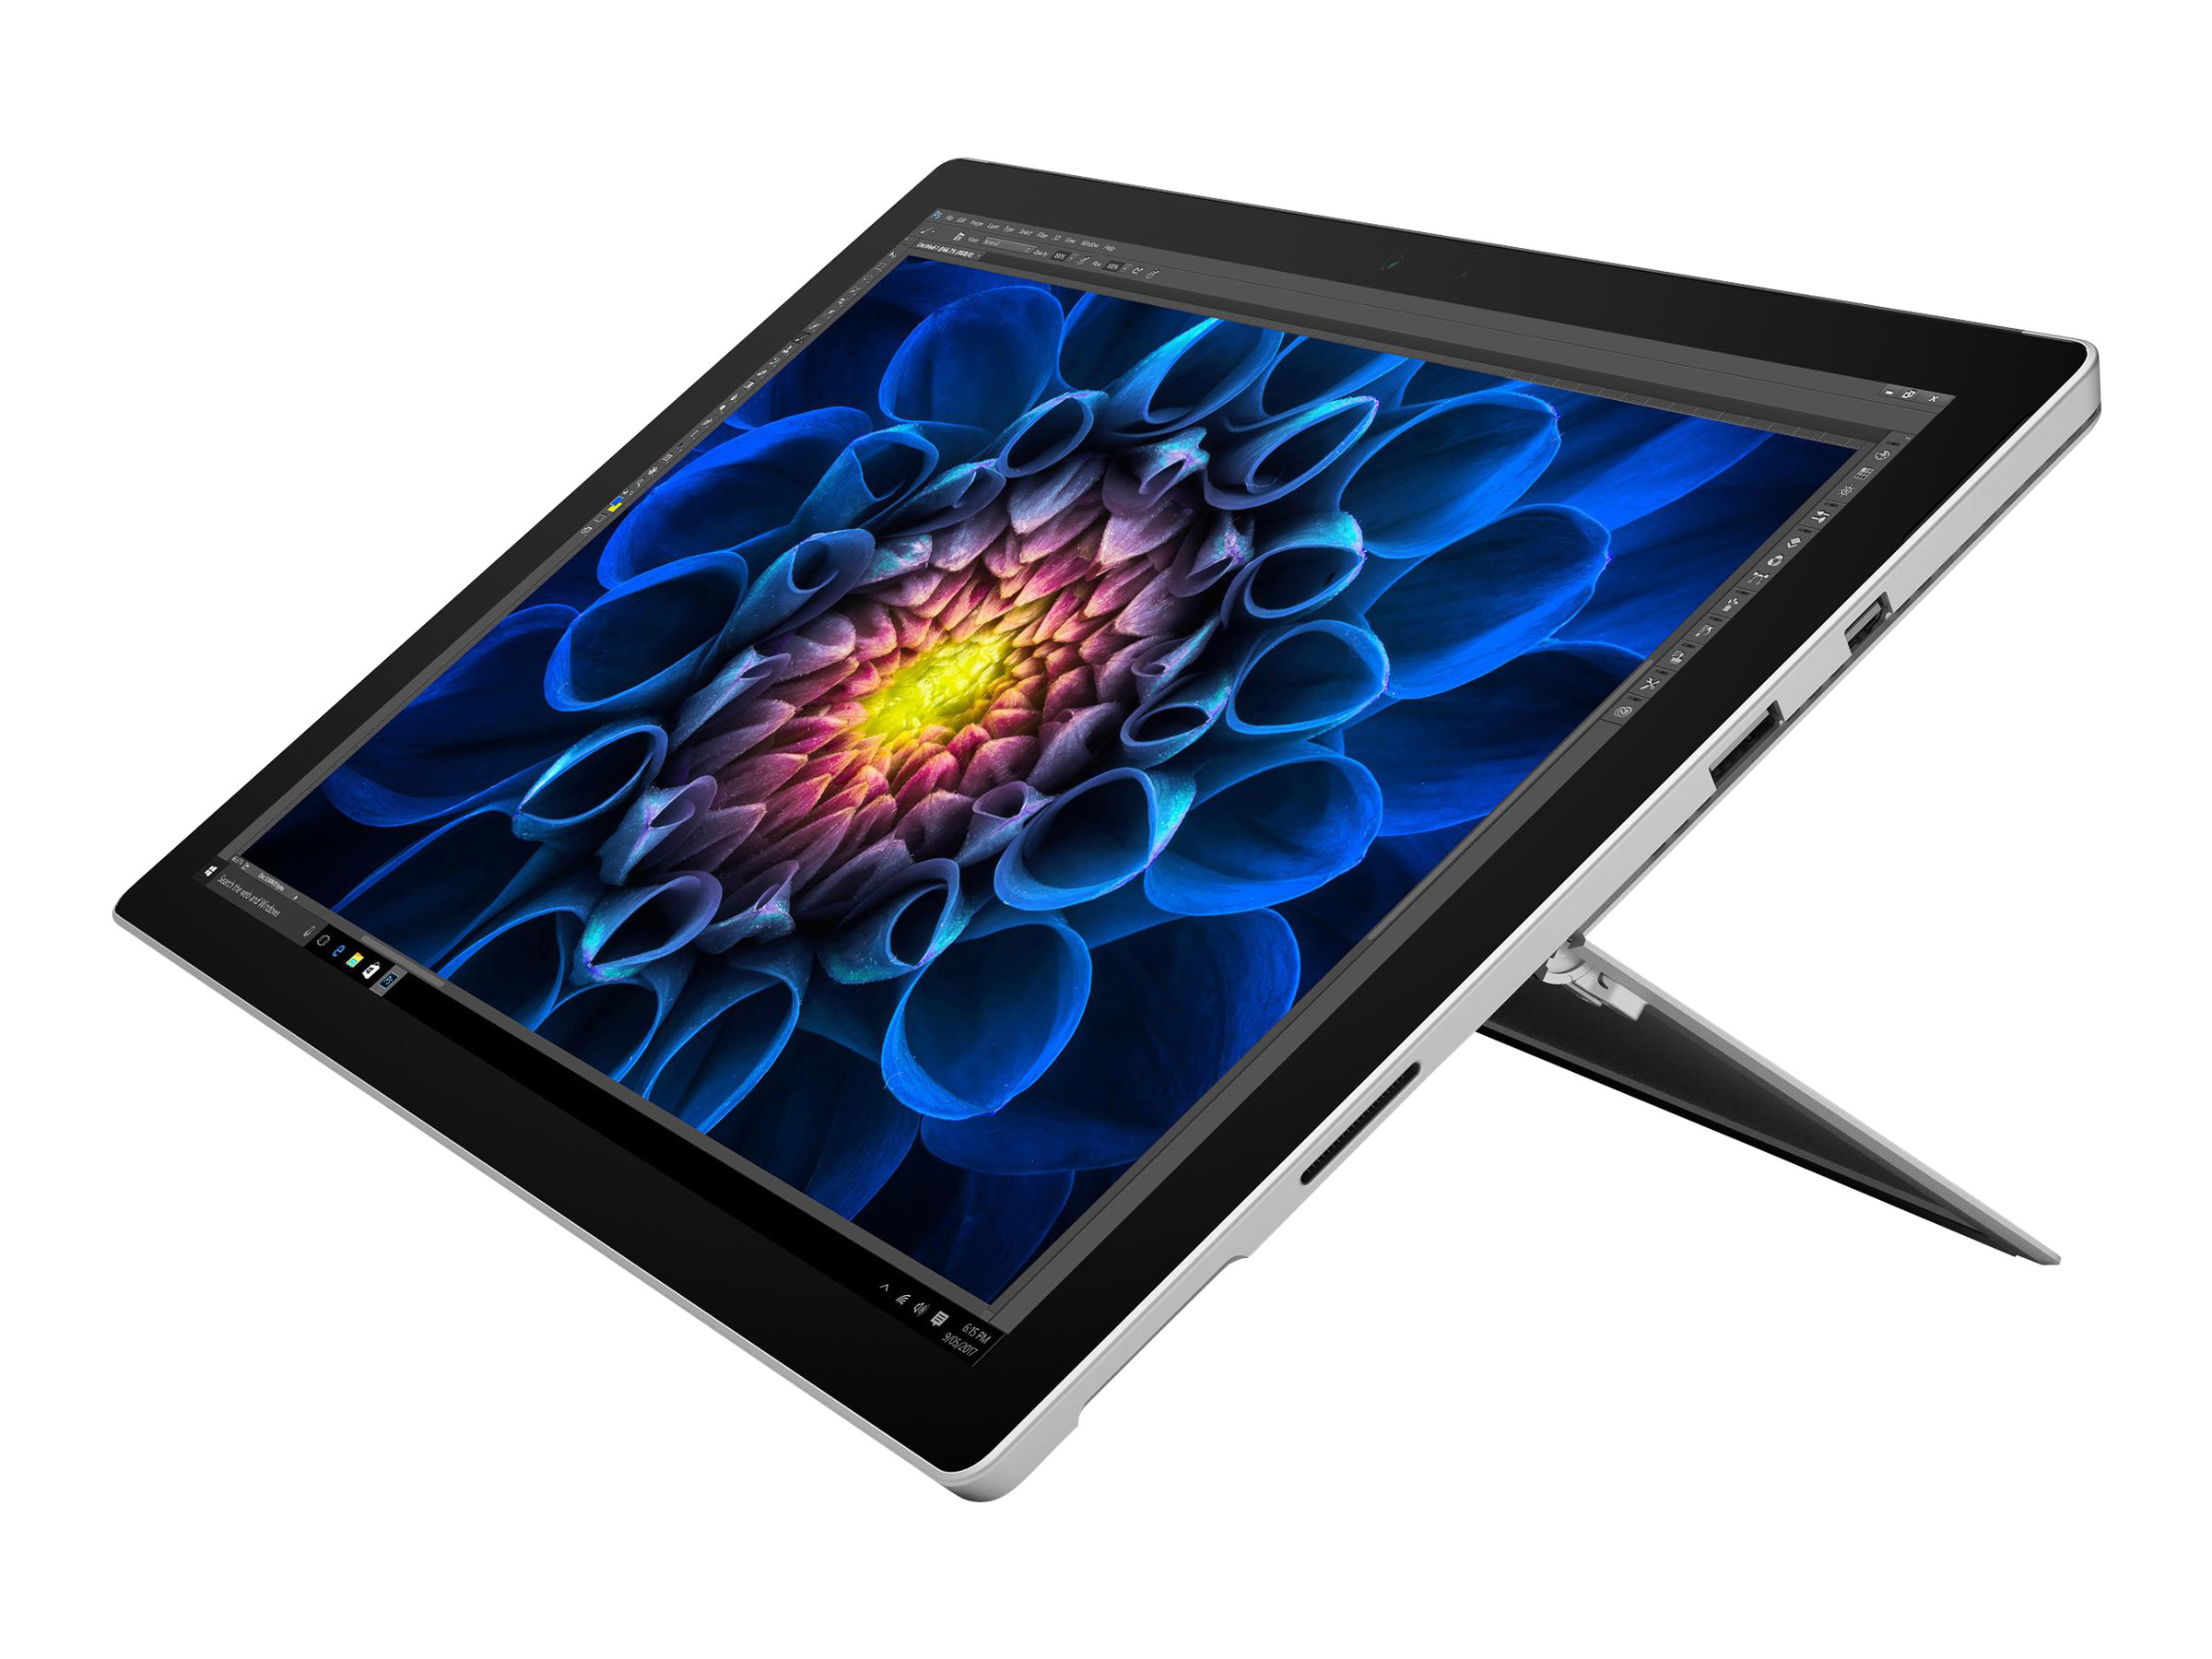 Microsoft Surface Pro 4 - Tablet - Core i7 6650U / 2.2 GHz - Win 10 Pro 64-bit - 16 GB RAM - 512 GB SSD - 12.3" touchscreen 2736 x 1824 - Iris Graphics 540 - Wi-Fi 5 - silver - Used - commercial - image 1 of 6